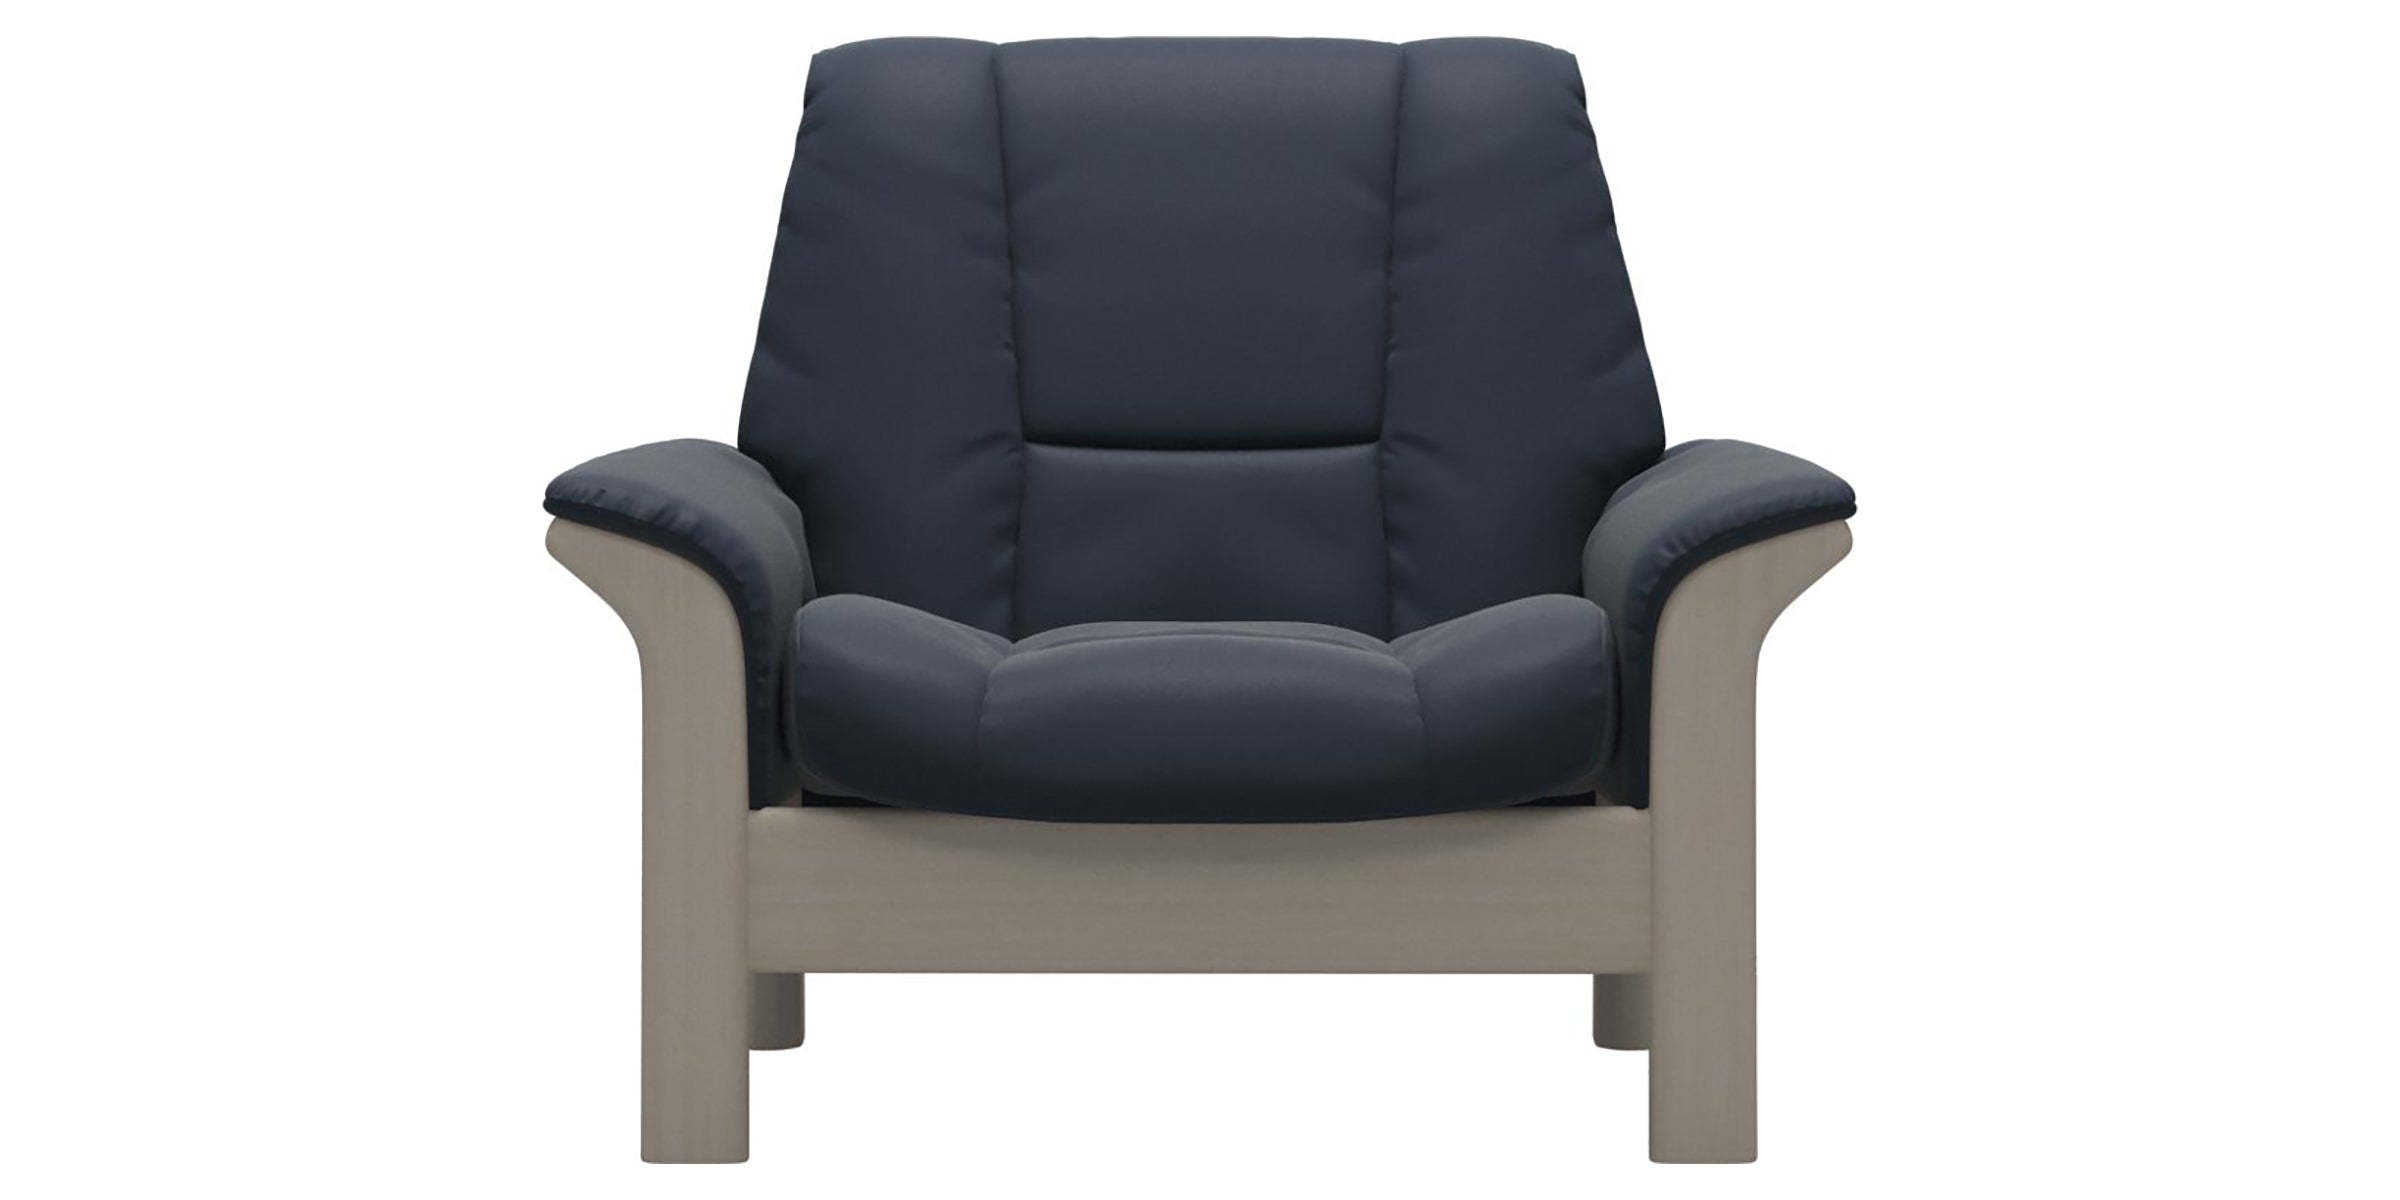 Paloma Leather Oxford Blue and Whitewash Base | Stressless Buckingham Low Back Chair | Valley Ridge Furniture